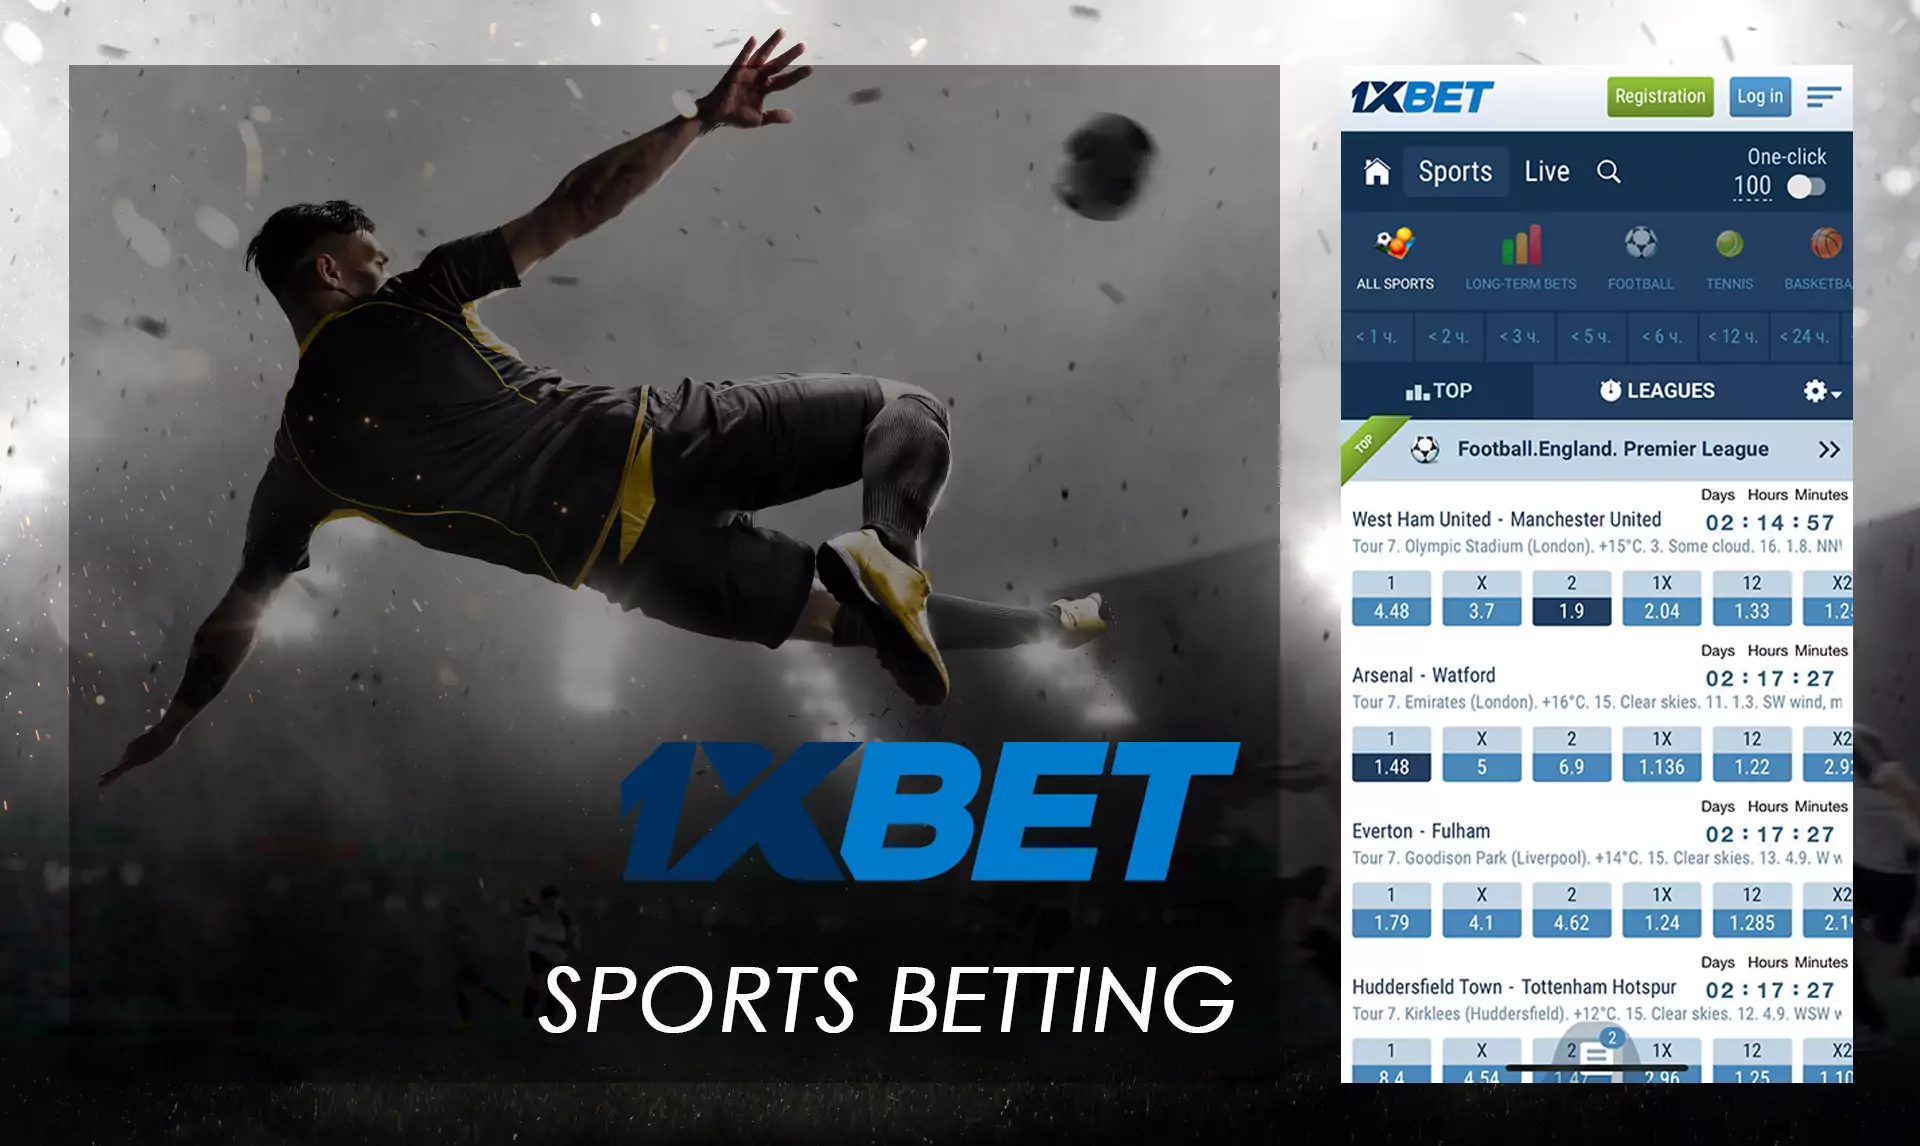 The 1xBet app allows you to bet on a variety of sports.